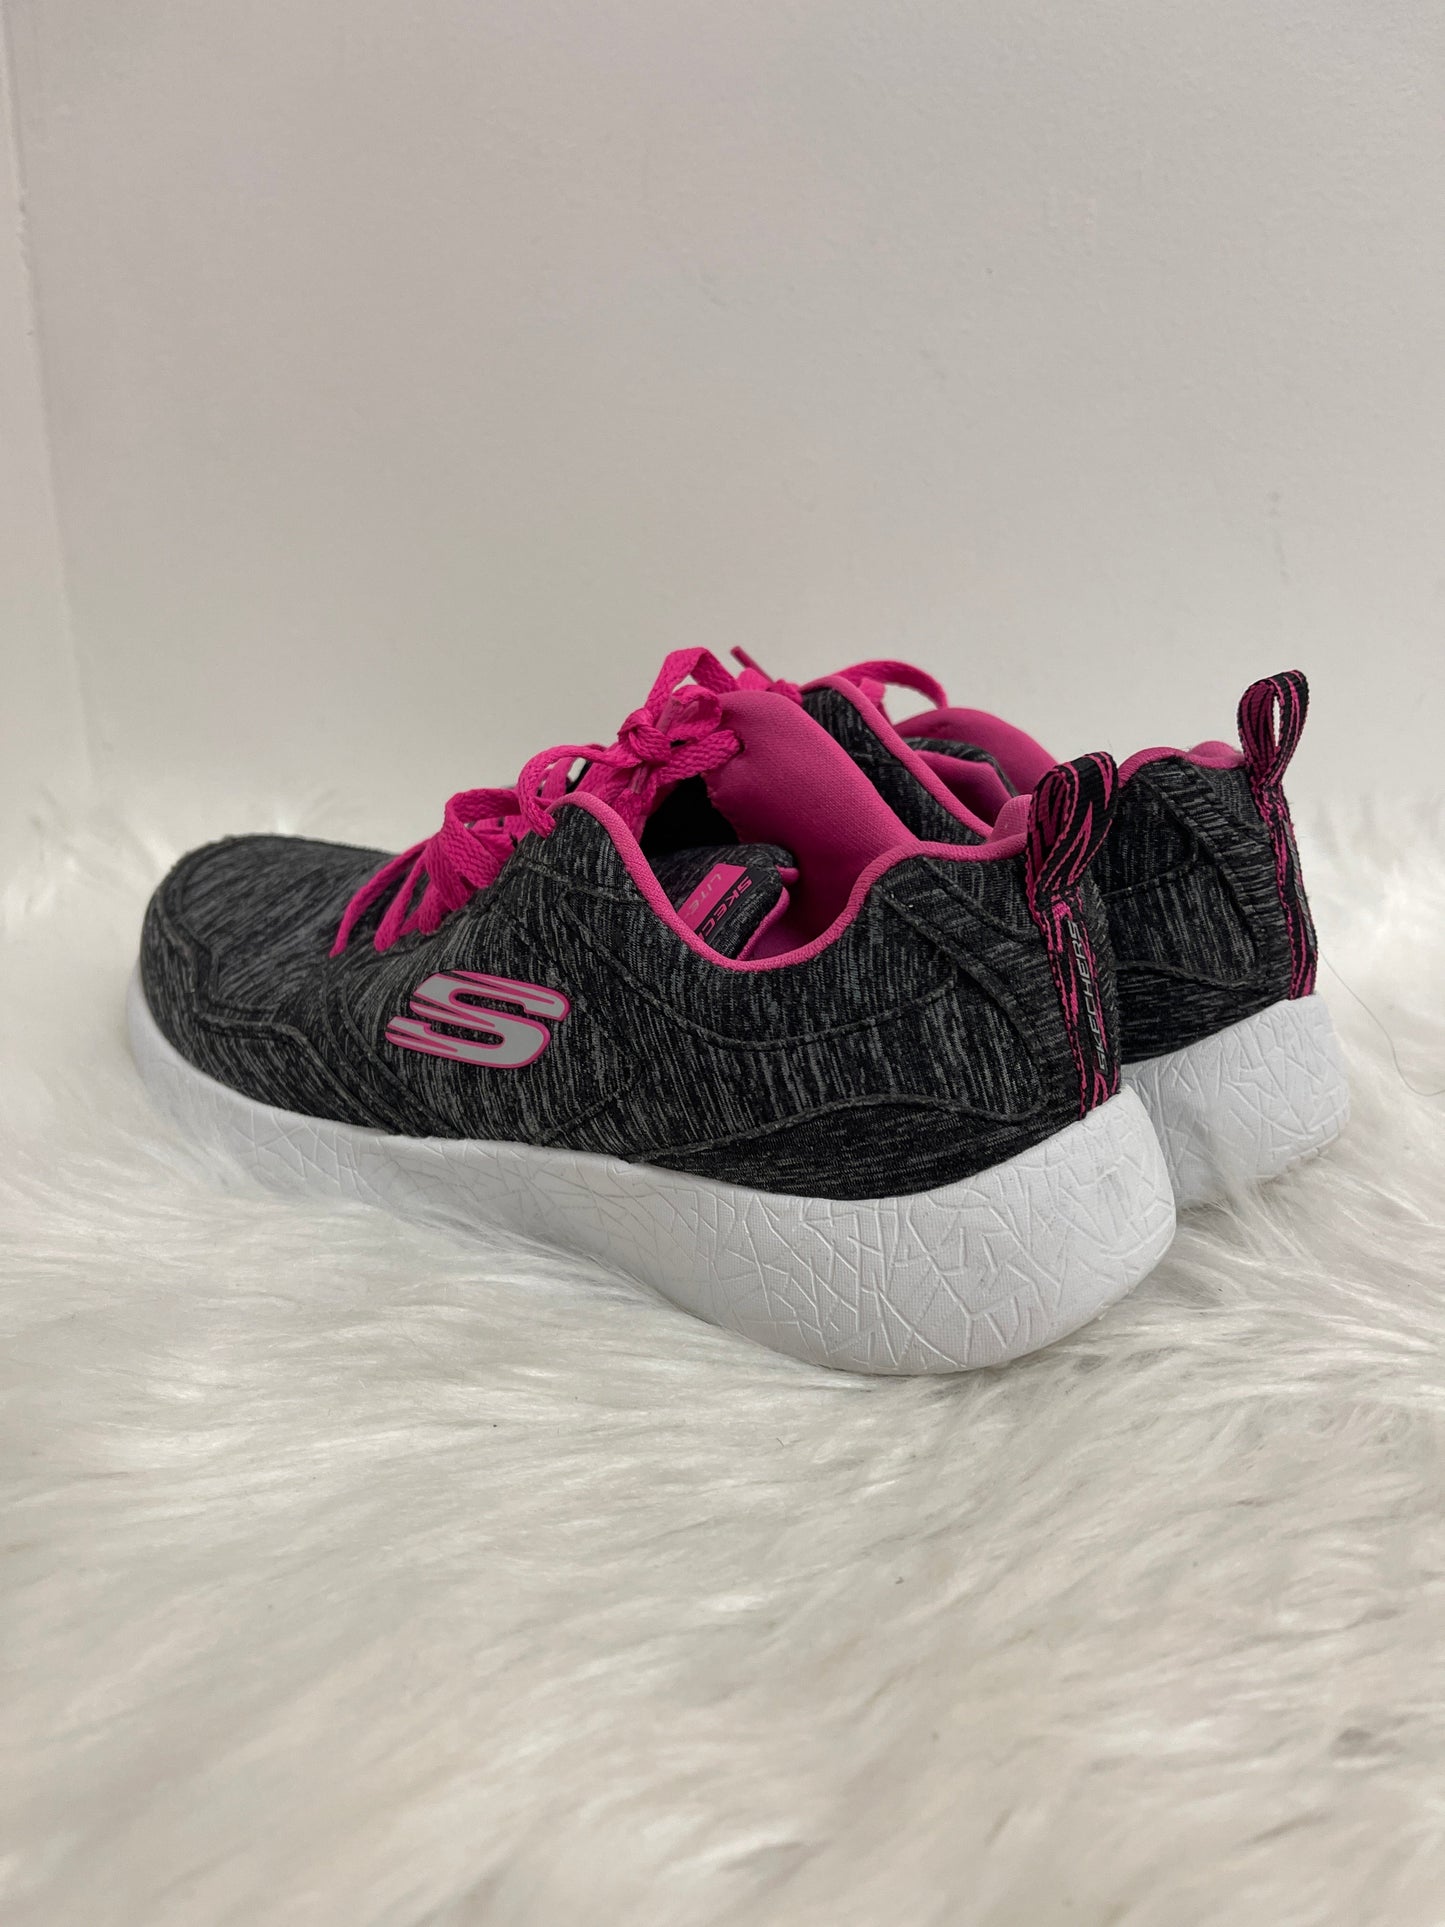 Grey & Pink Shoes Athletic Skechers, Size 7